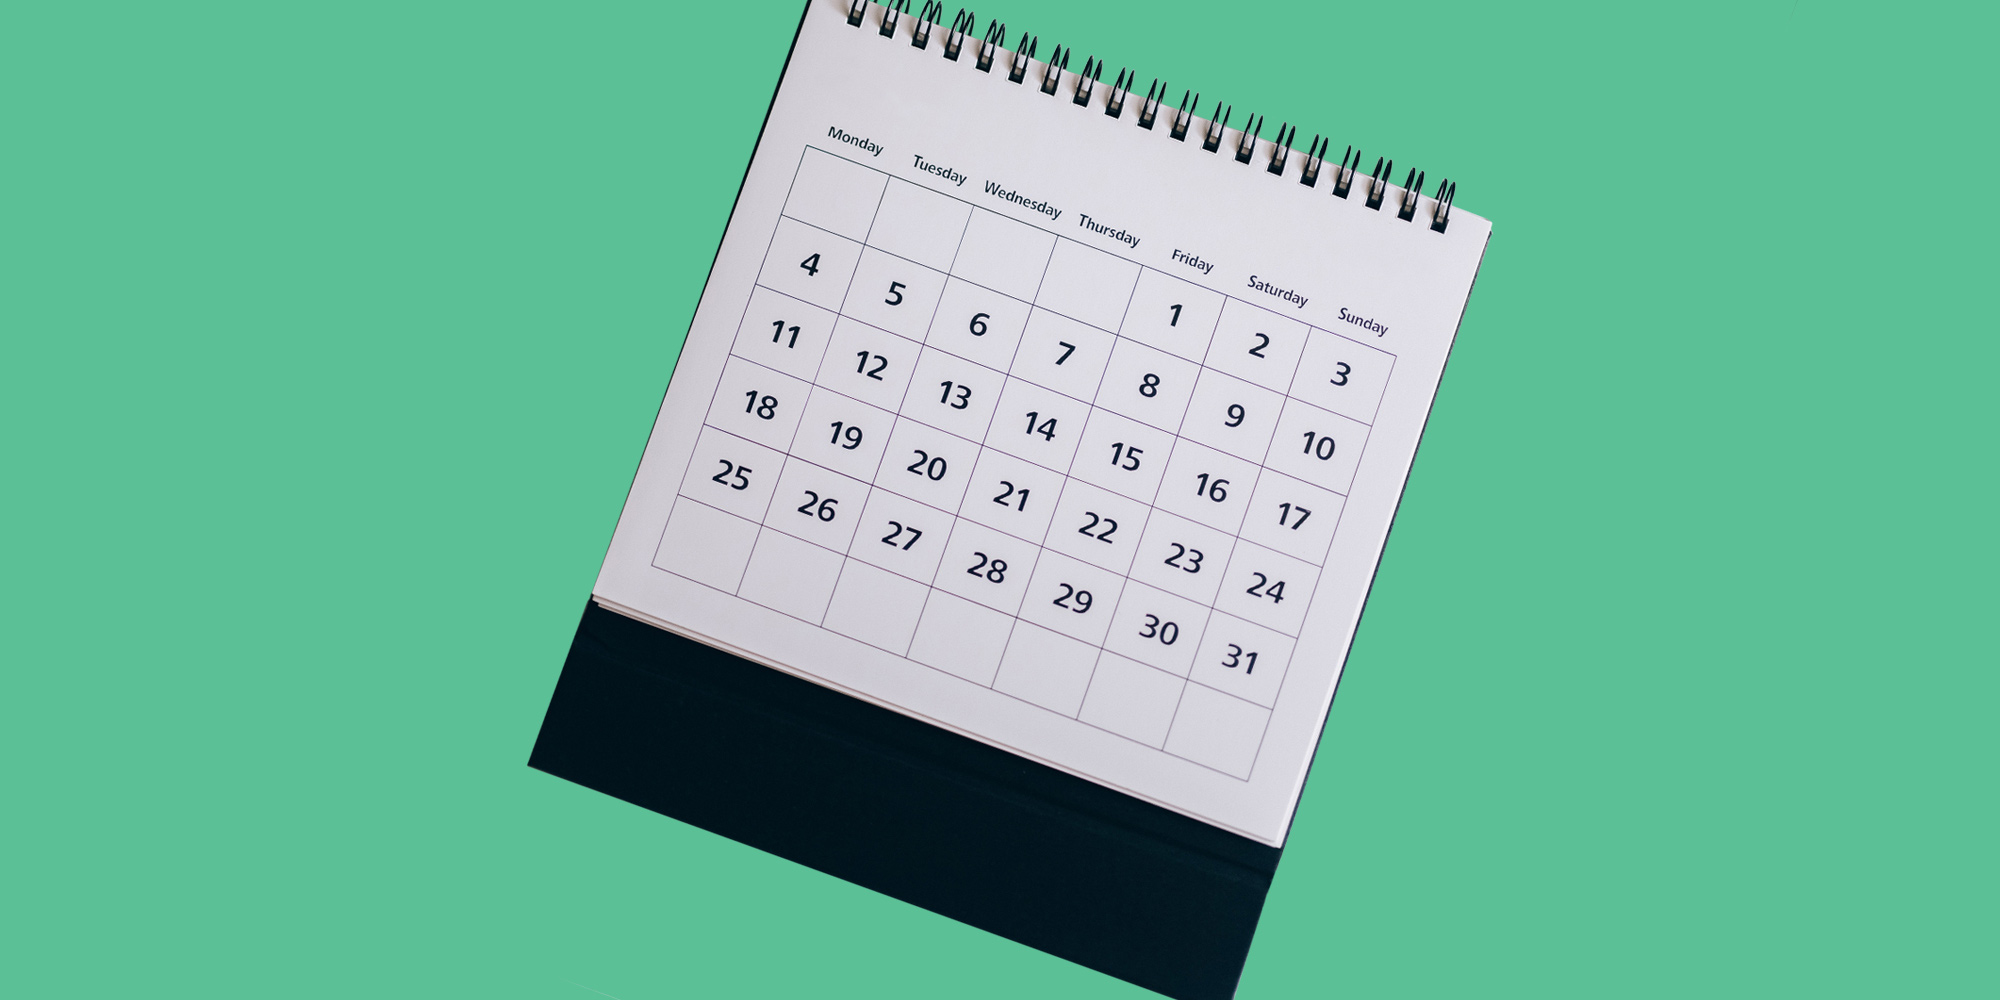 Monthly calendar on a green background. 30 day sobriety guide